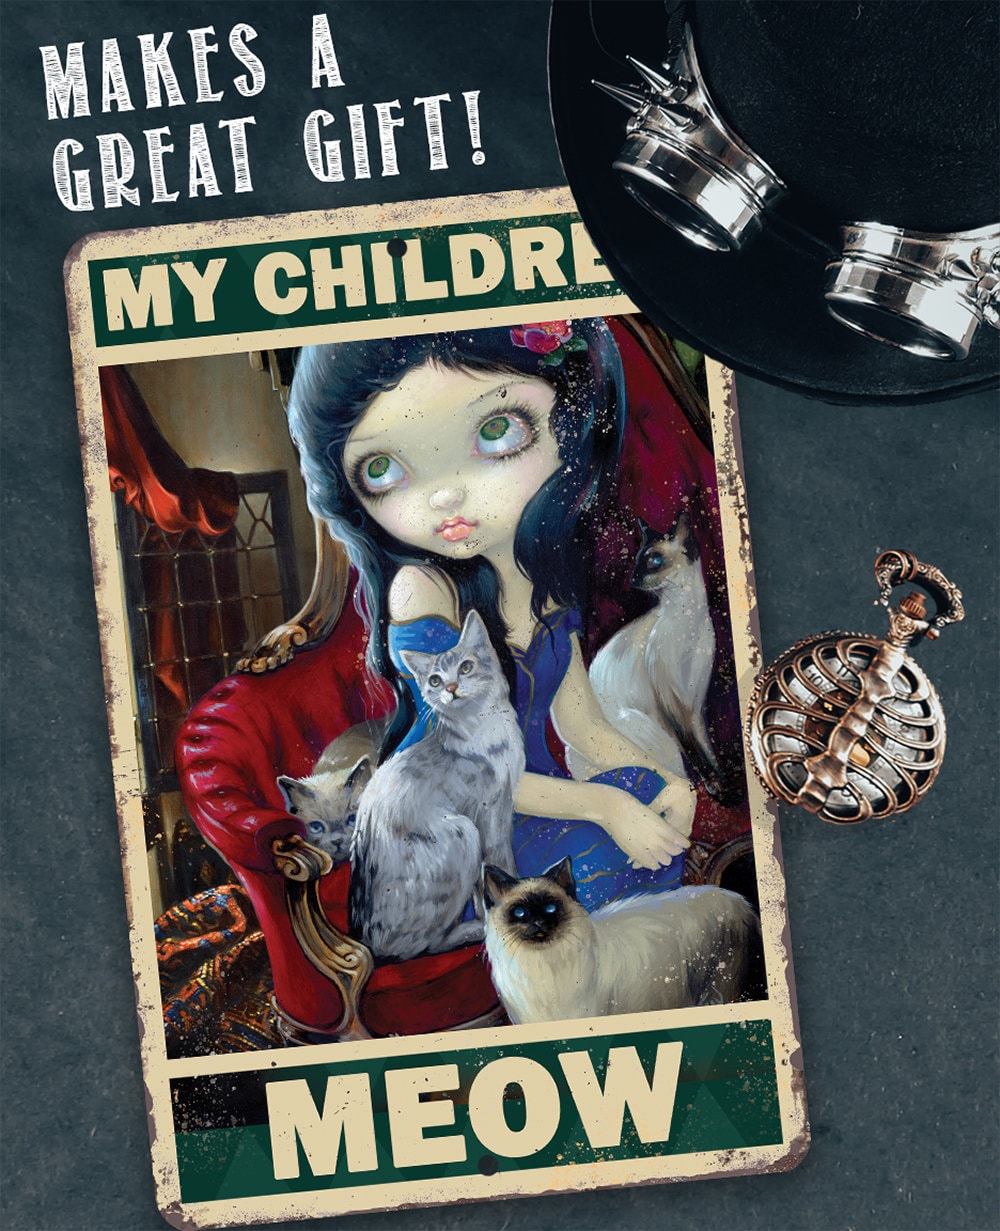 My Children Meow - 8" x 12" or 12" x 18" Aluminum Tin Awesome Gothic Metal Poster Lone Star Art 